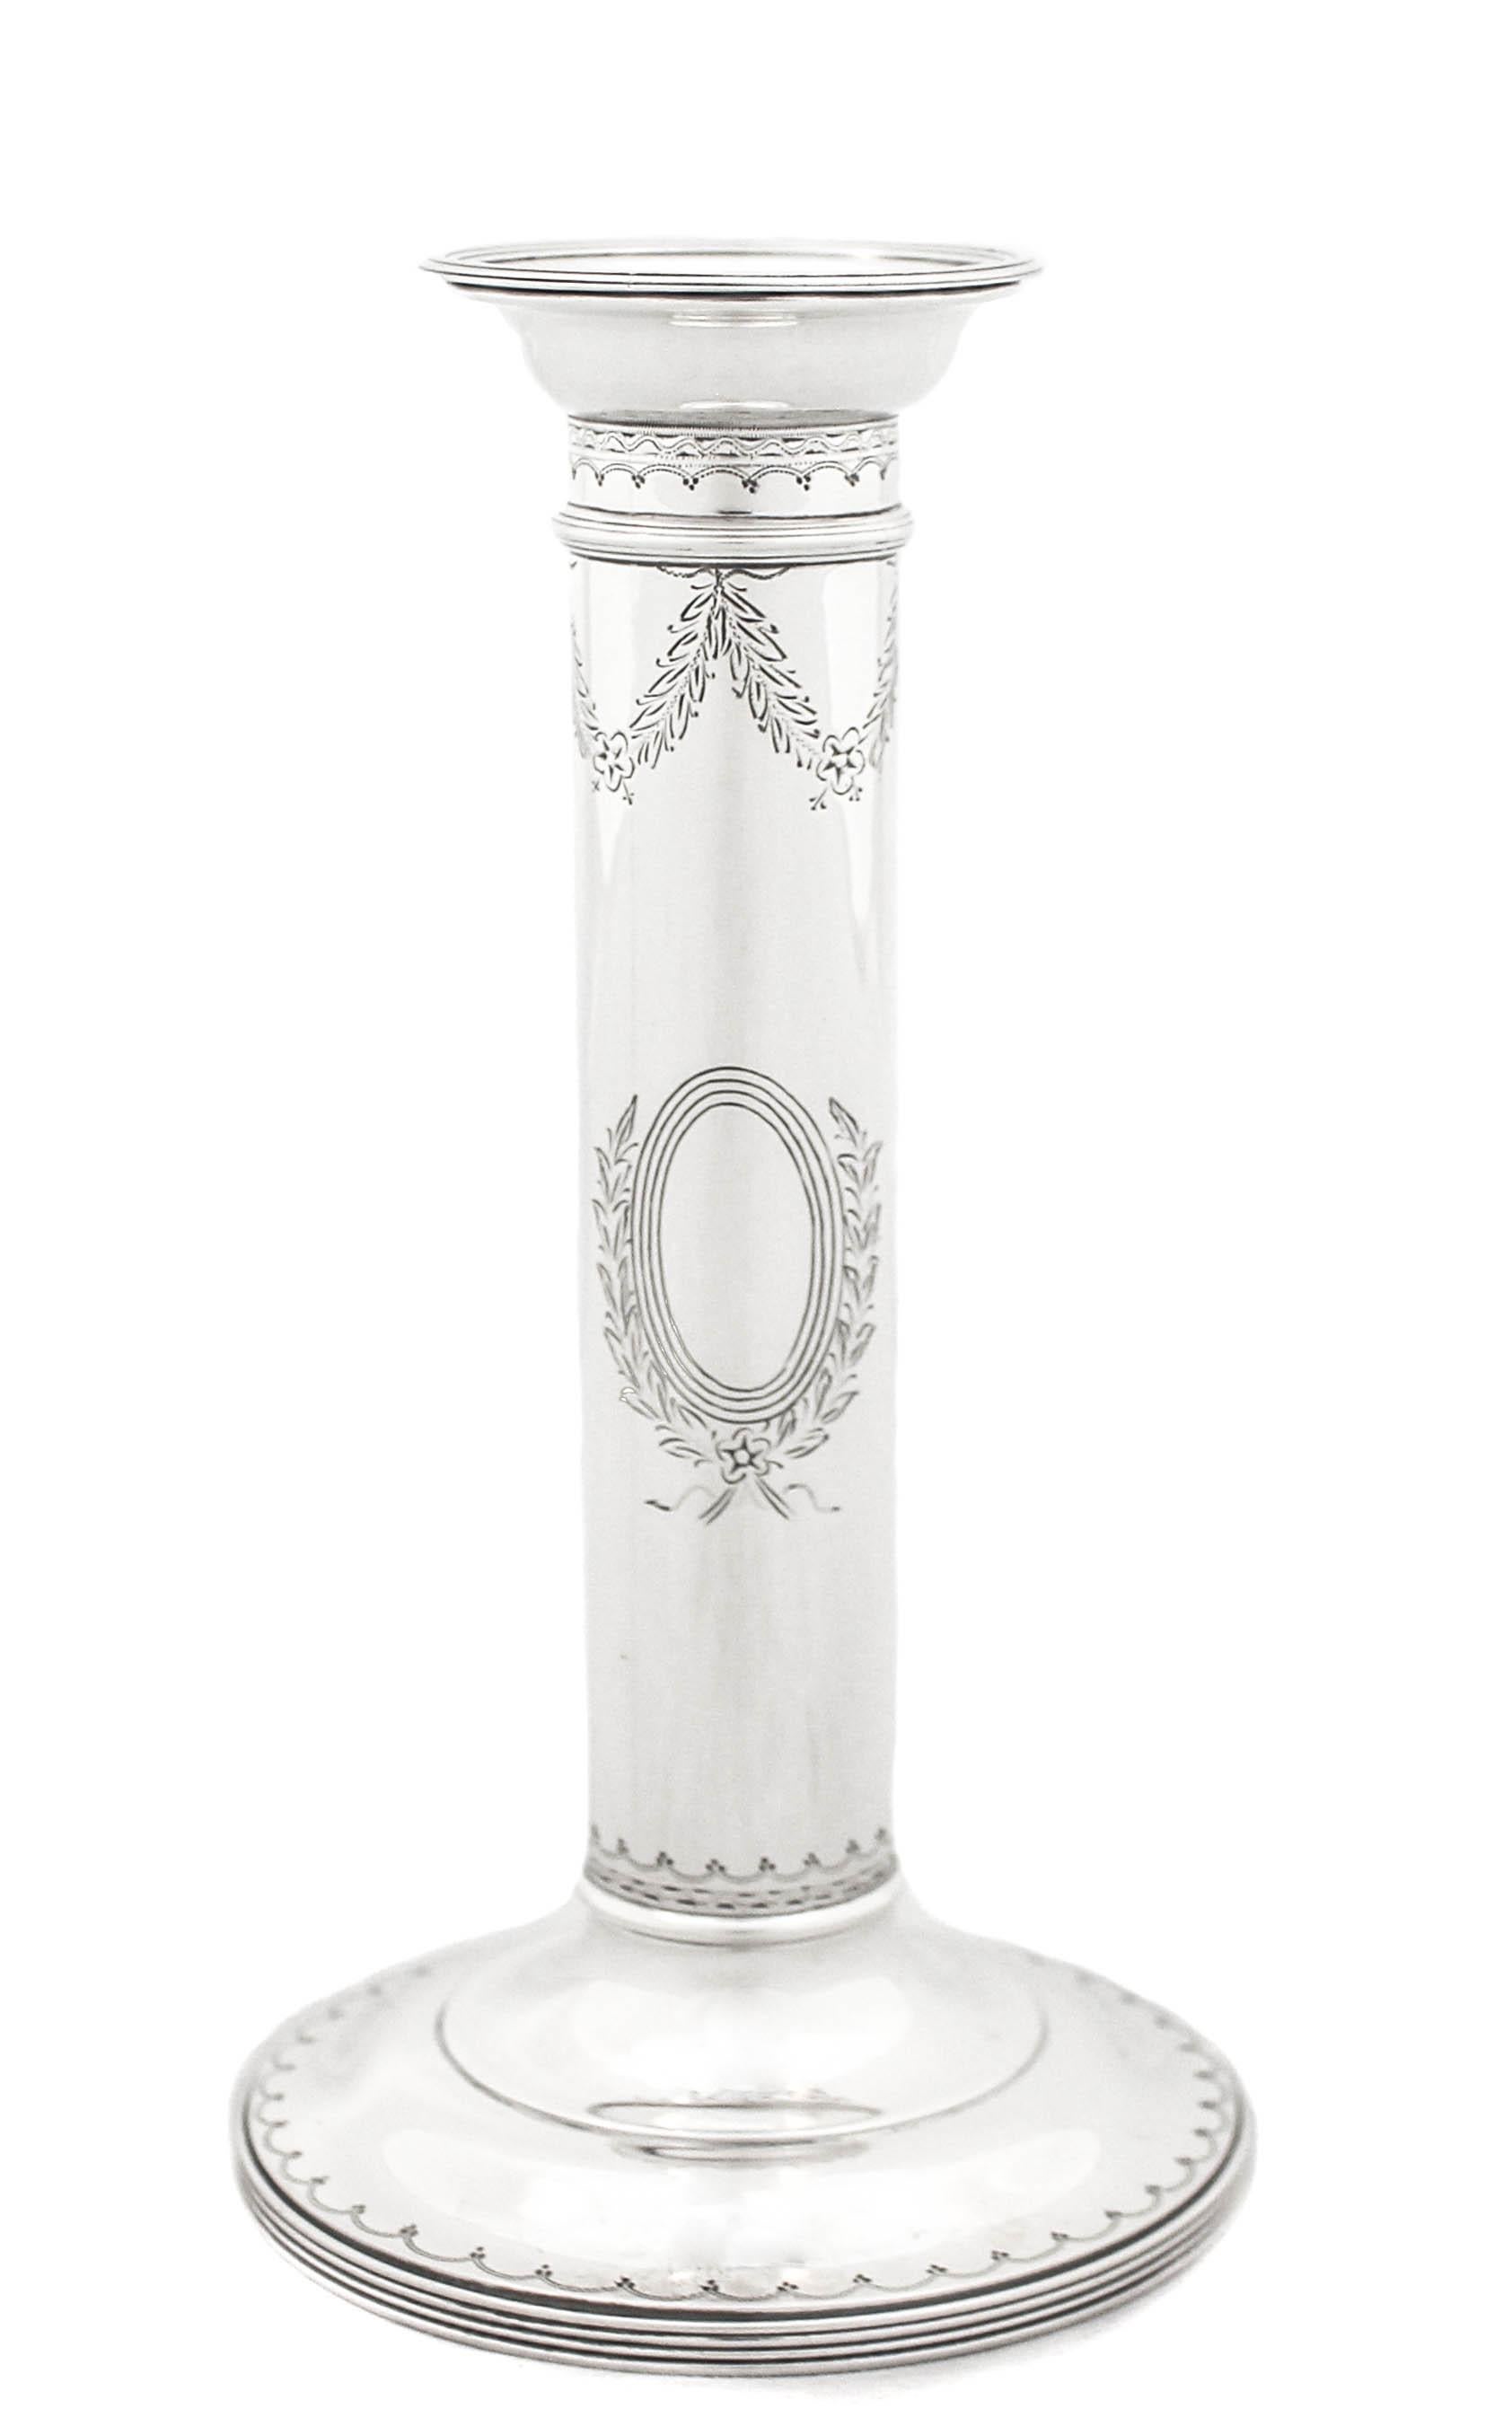 Being offered is a pair of sterling silver candlesticks by William Durgin.  They are column-shaped in the Tuscan style. A Tuscan column looks basically like a Doric column, except it is not fluted.  It has a simple shaft that rests on a simple,